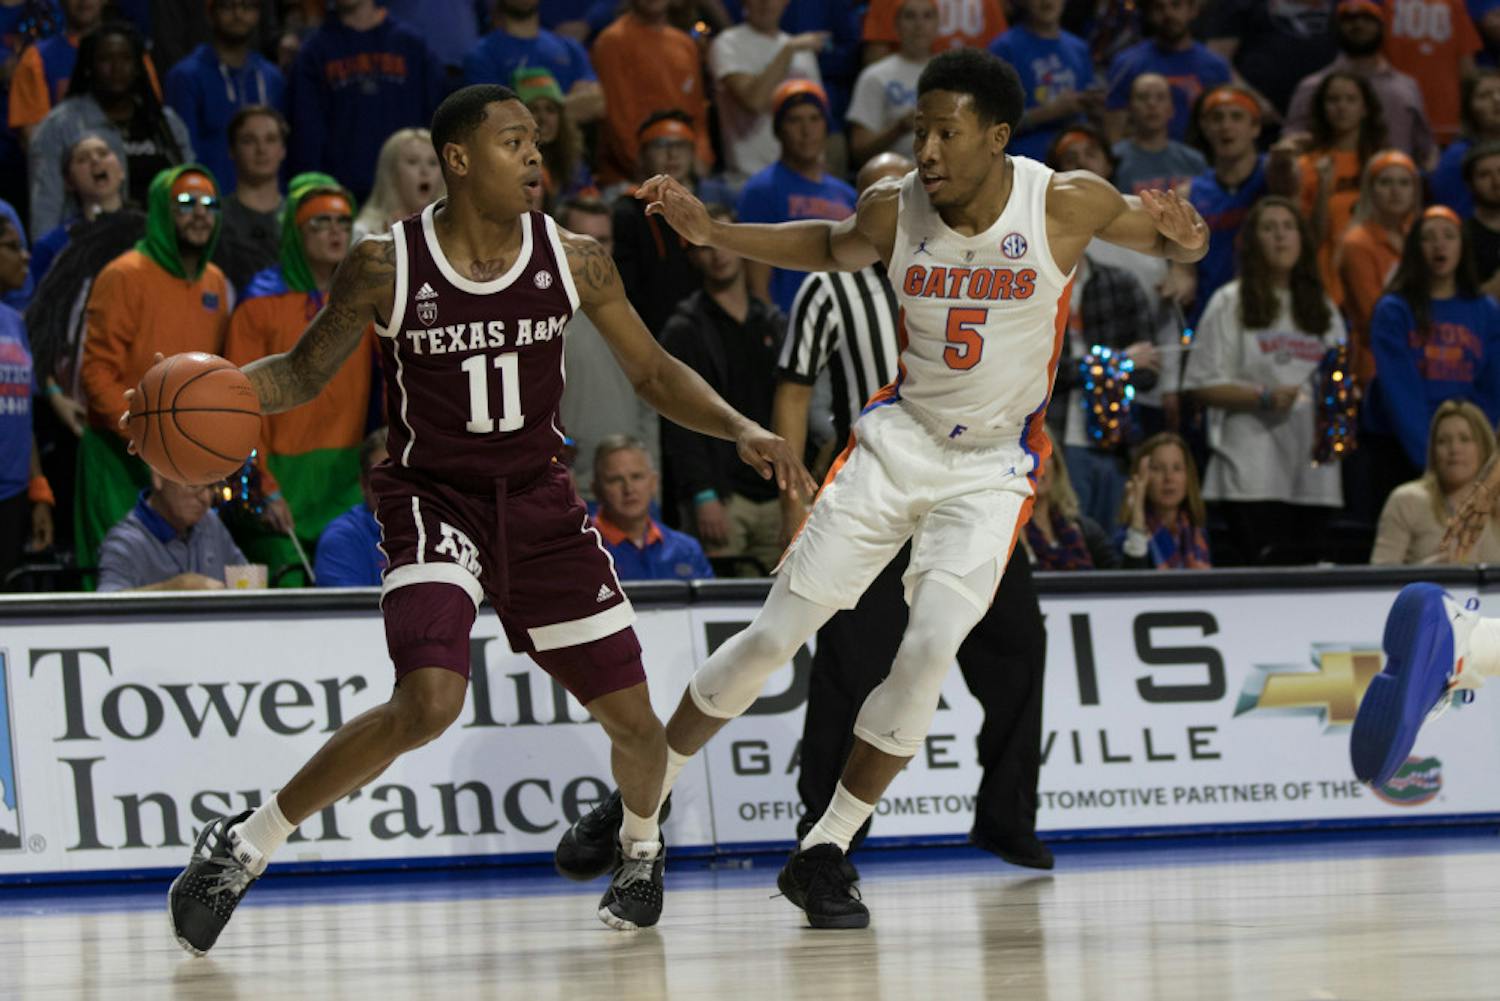 Florida guard KeVaughn Allen leads the Gators in scoring this season with 12.7 points per game. He is averaging 17.8 points per game in conference play. 